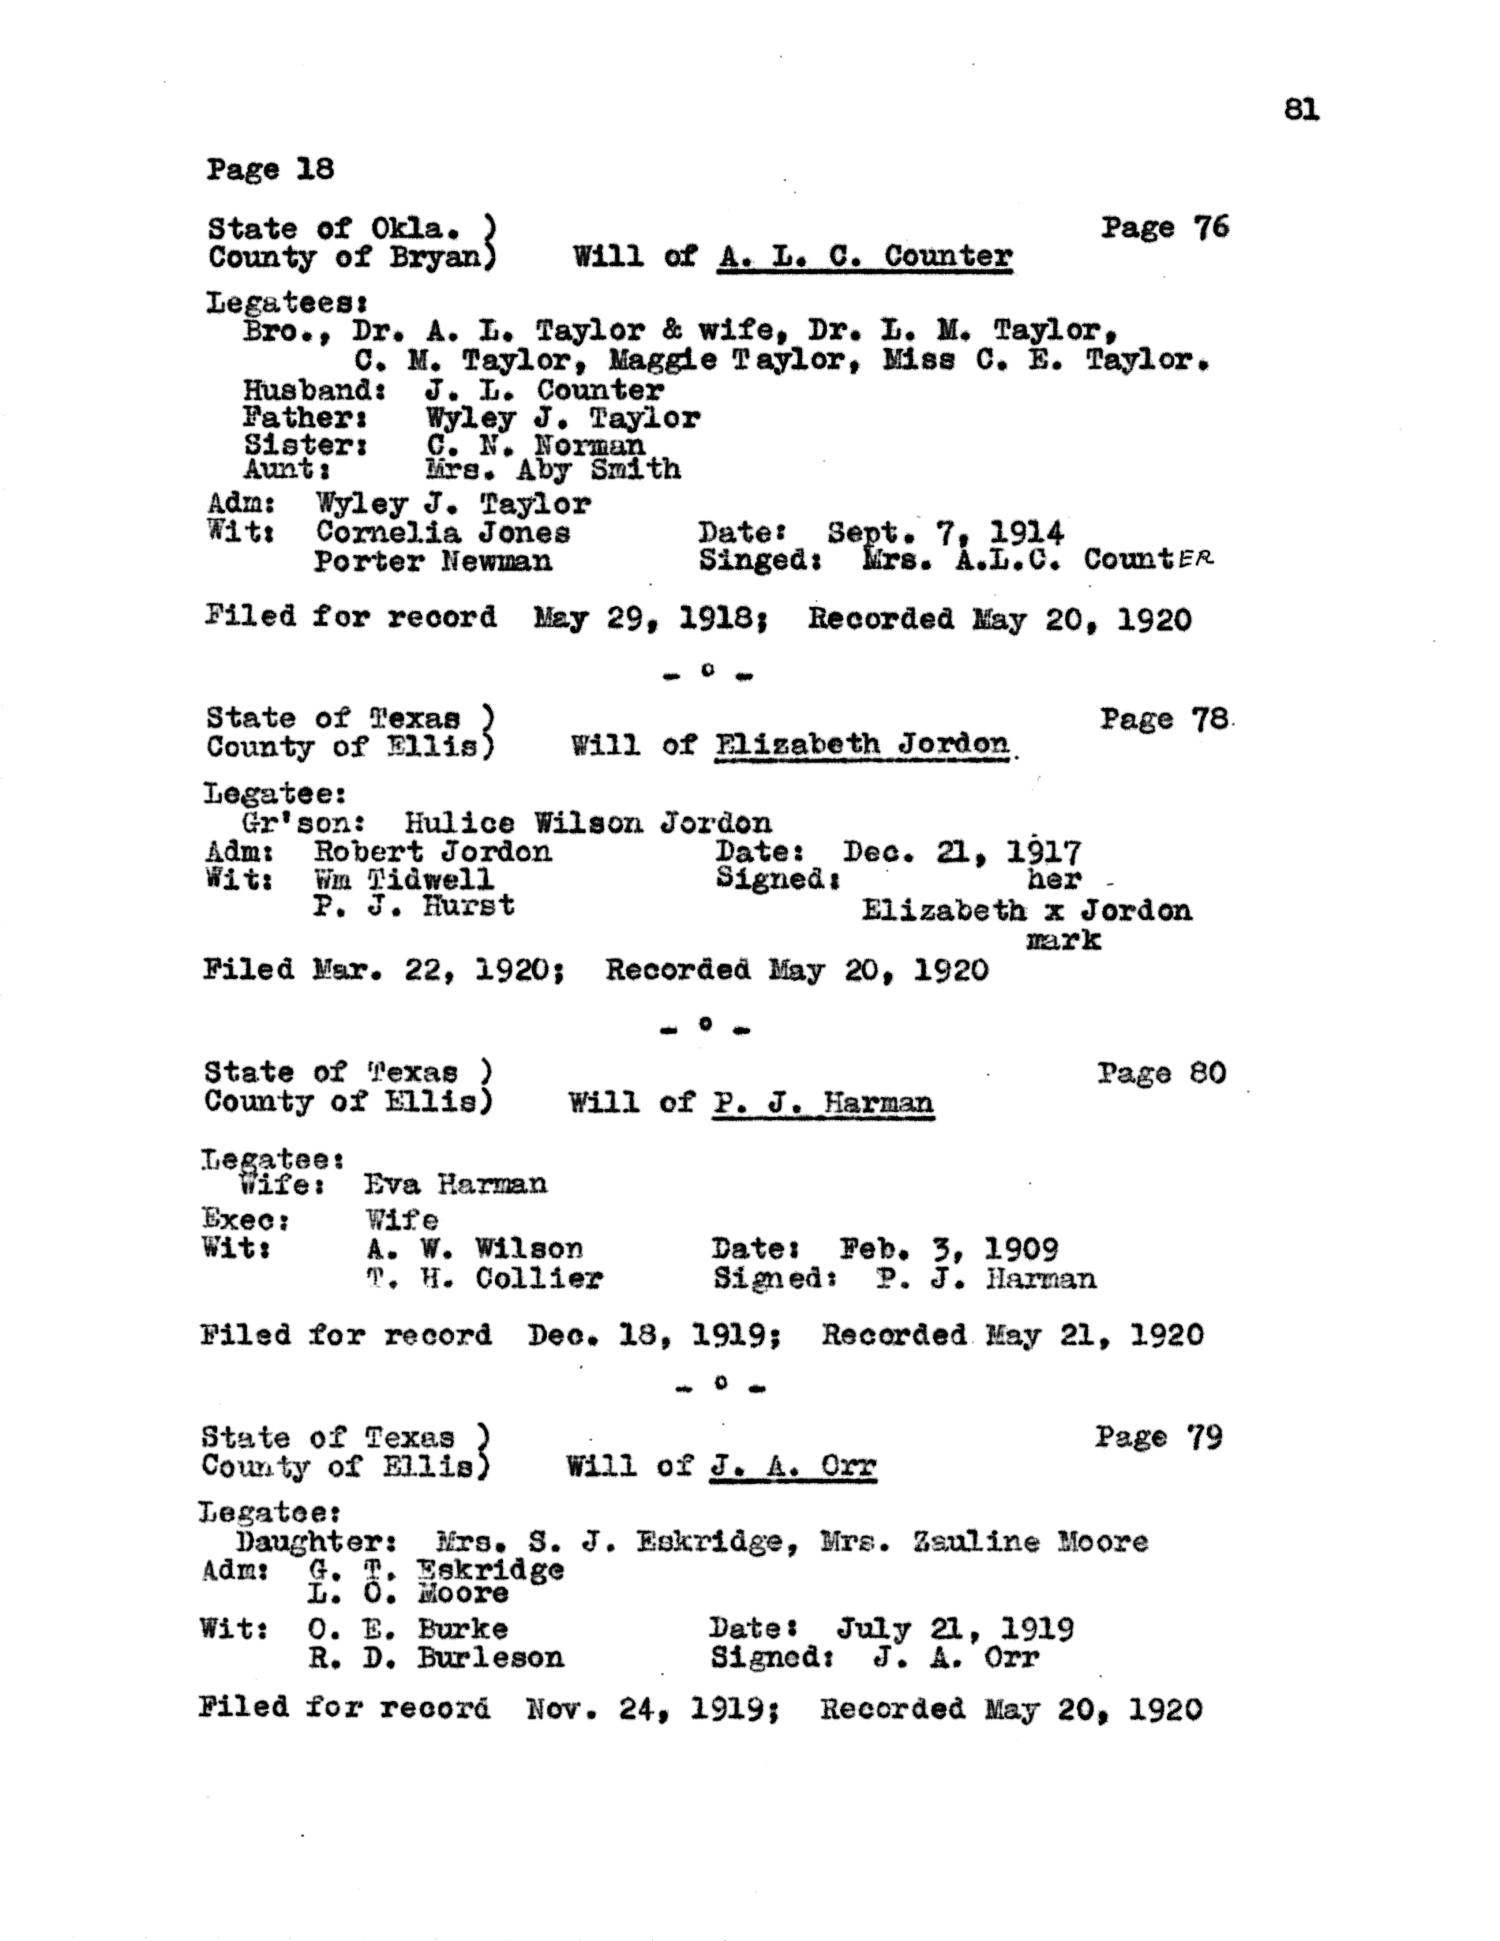 Texas Genealogical Records Ellis County Volume 15 17 1961 Page 81 The Portal To Texas History